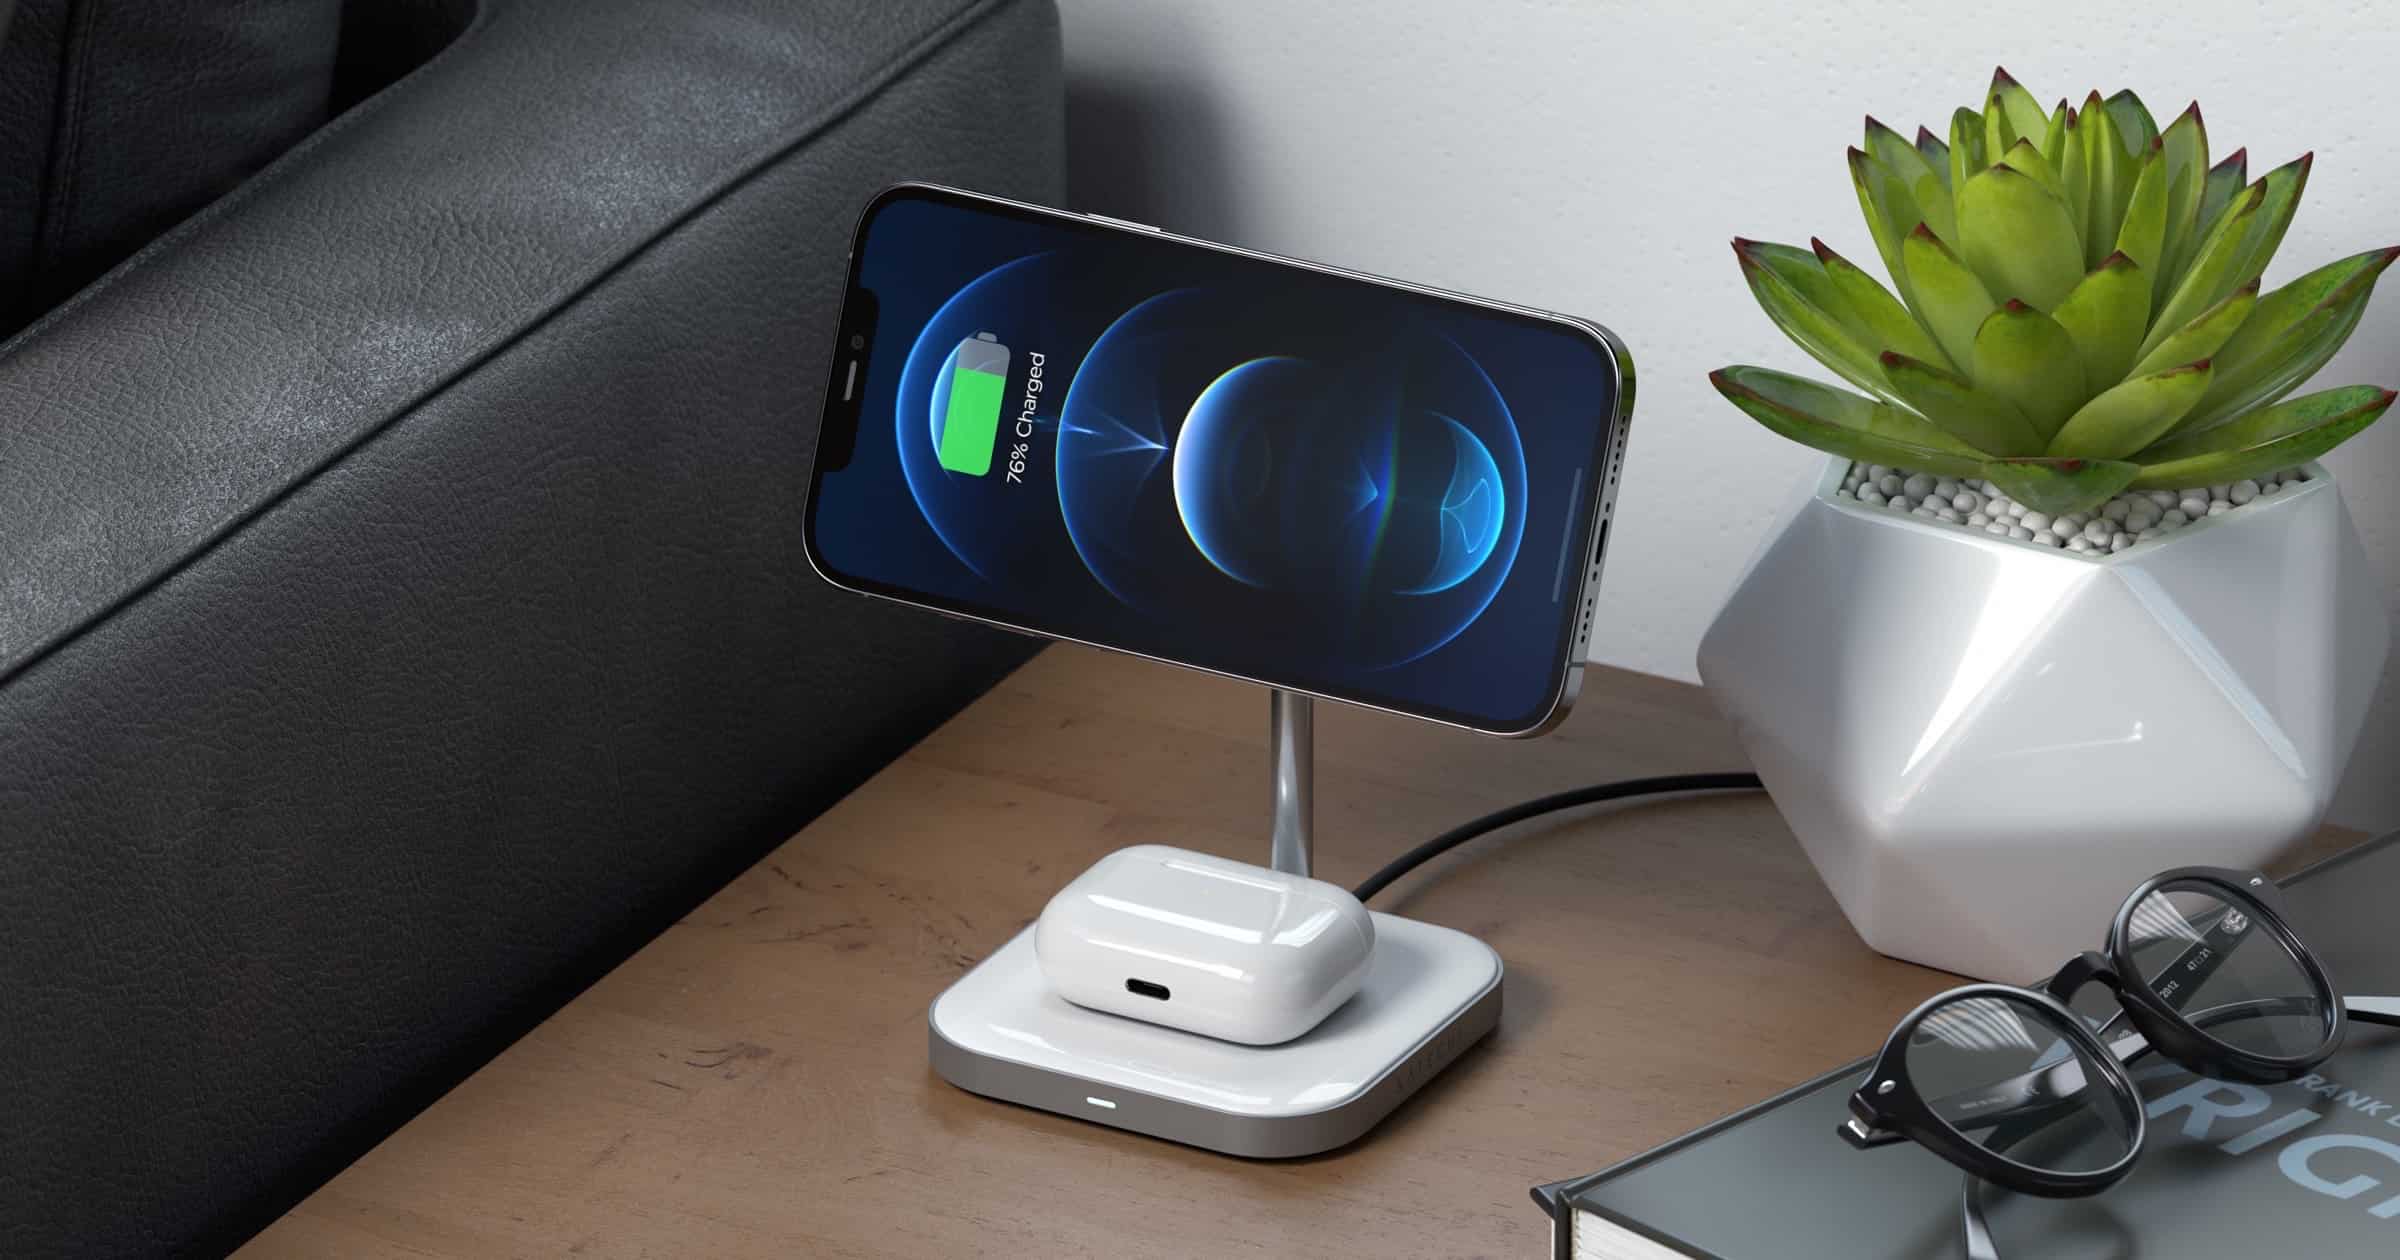 Satechi Magnetic 2-in-1 Wireless Charging Stand